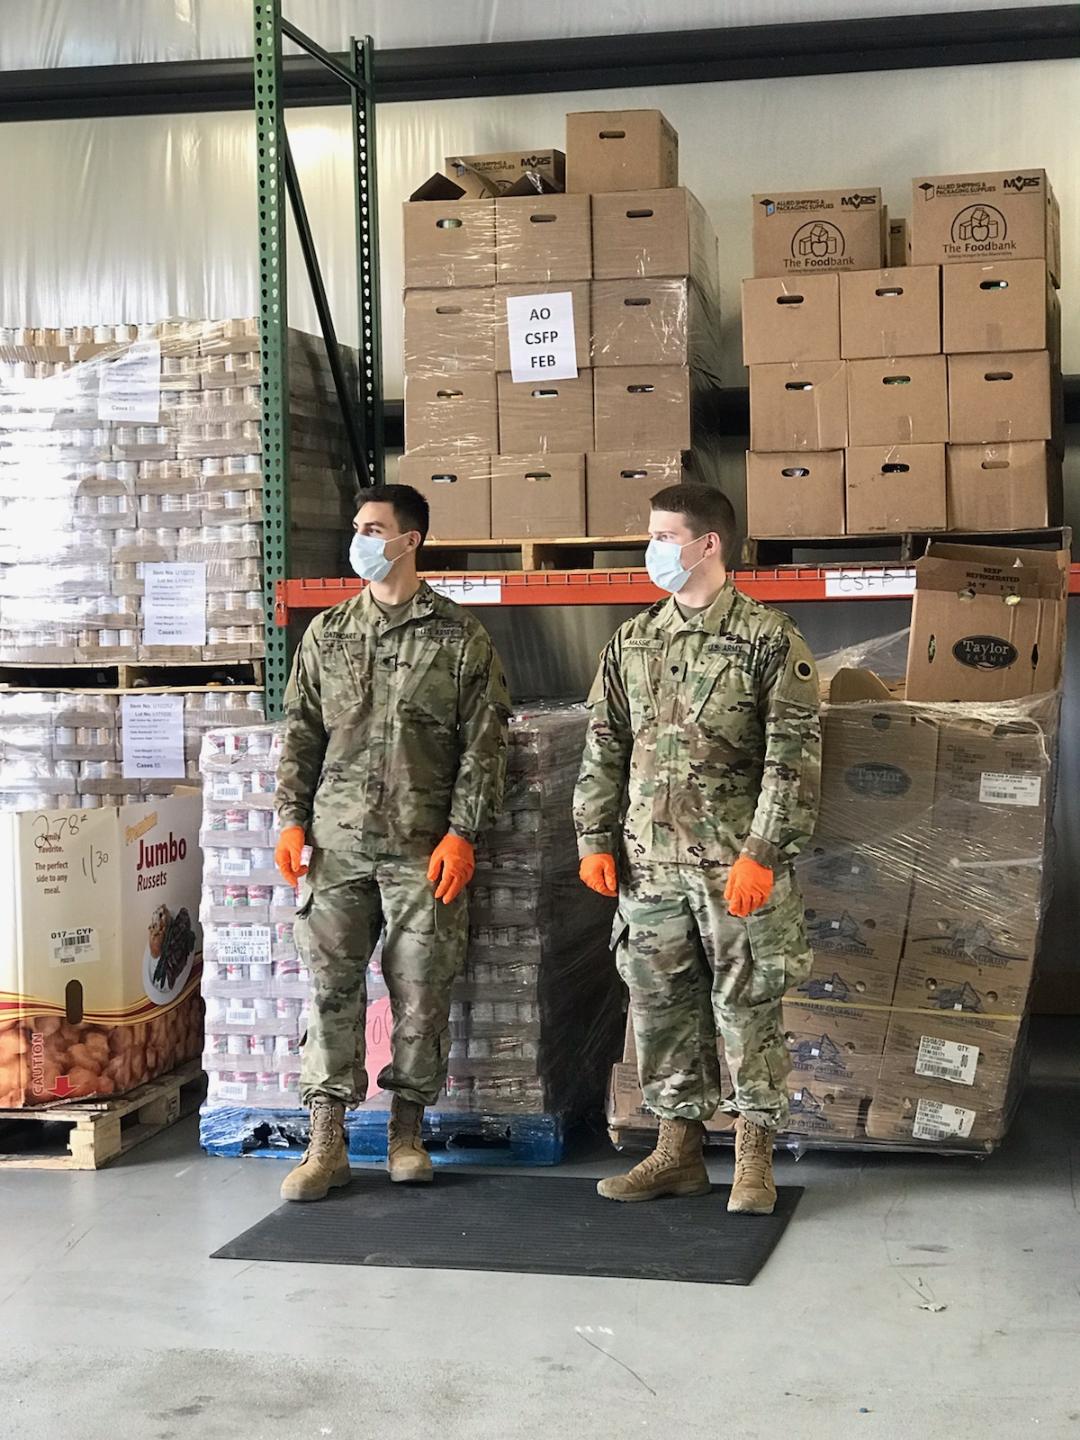 Soldiers with masks and gloves standing in front of pallets at warehouse.